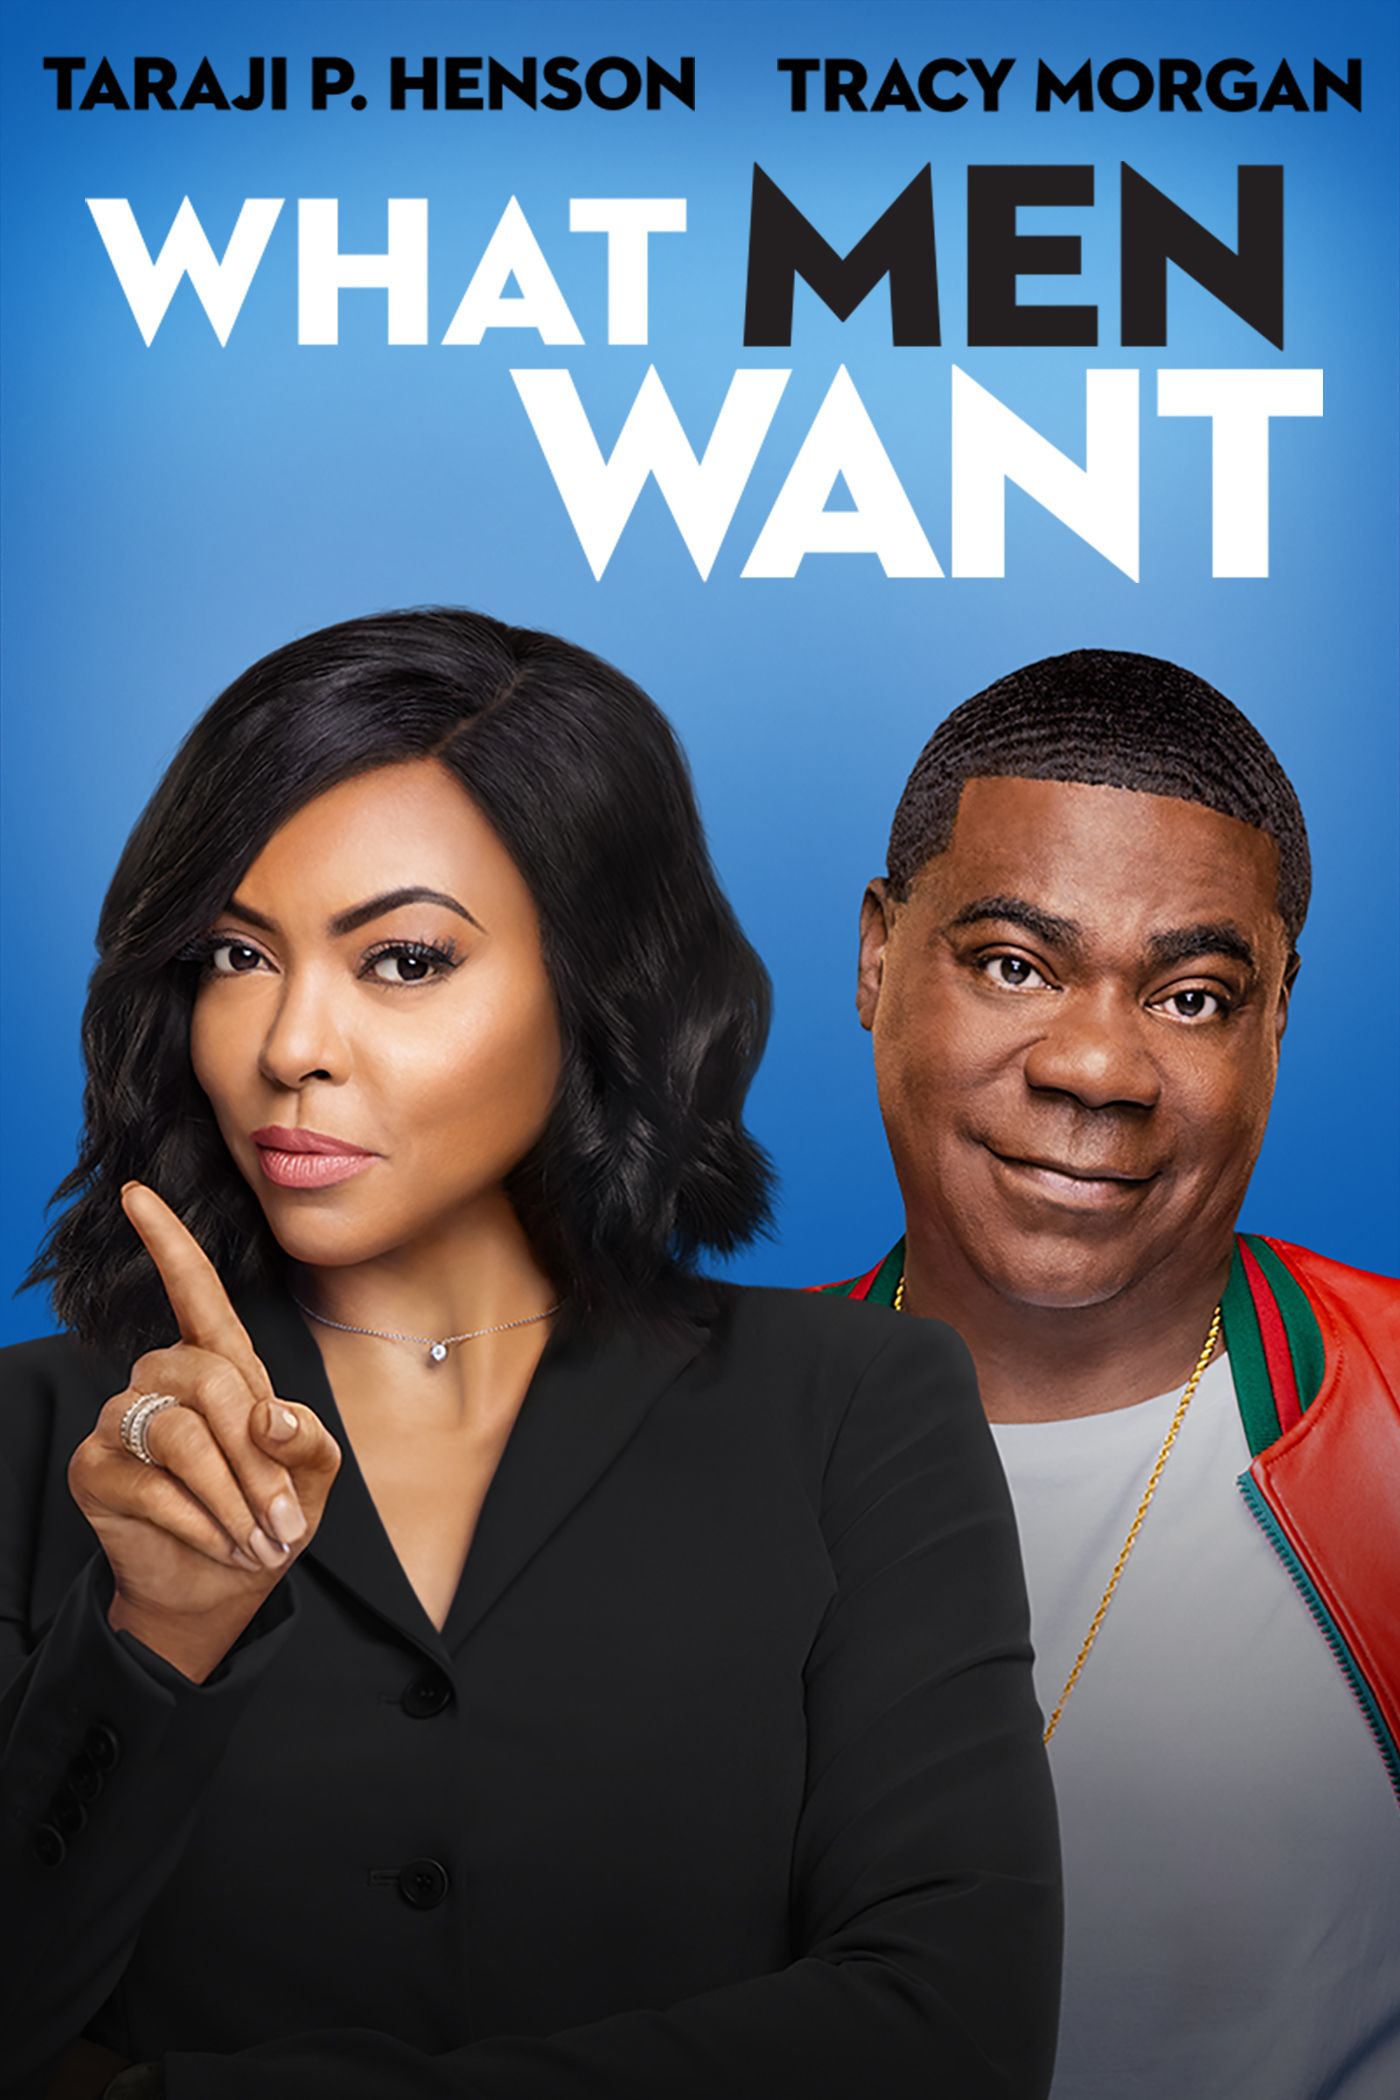 What Men Want Blu-ray cover art